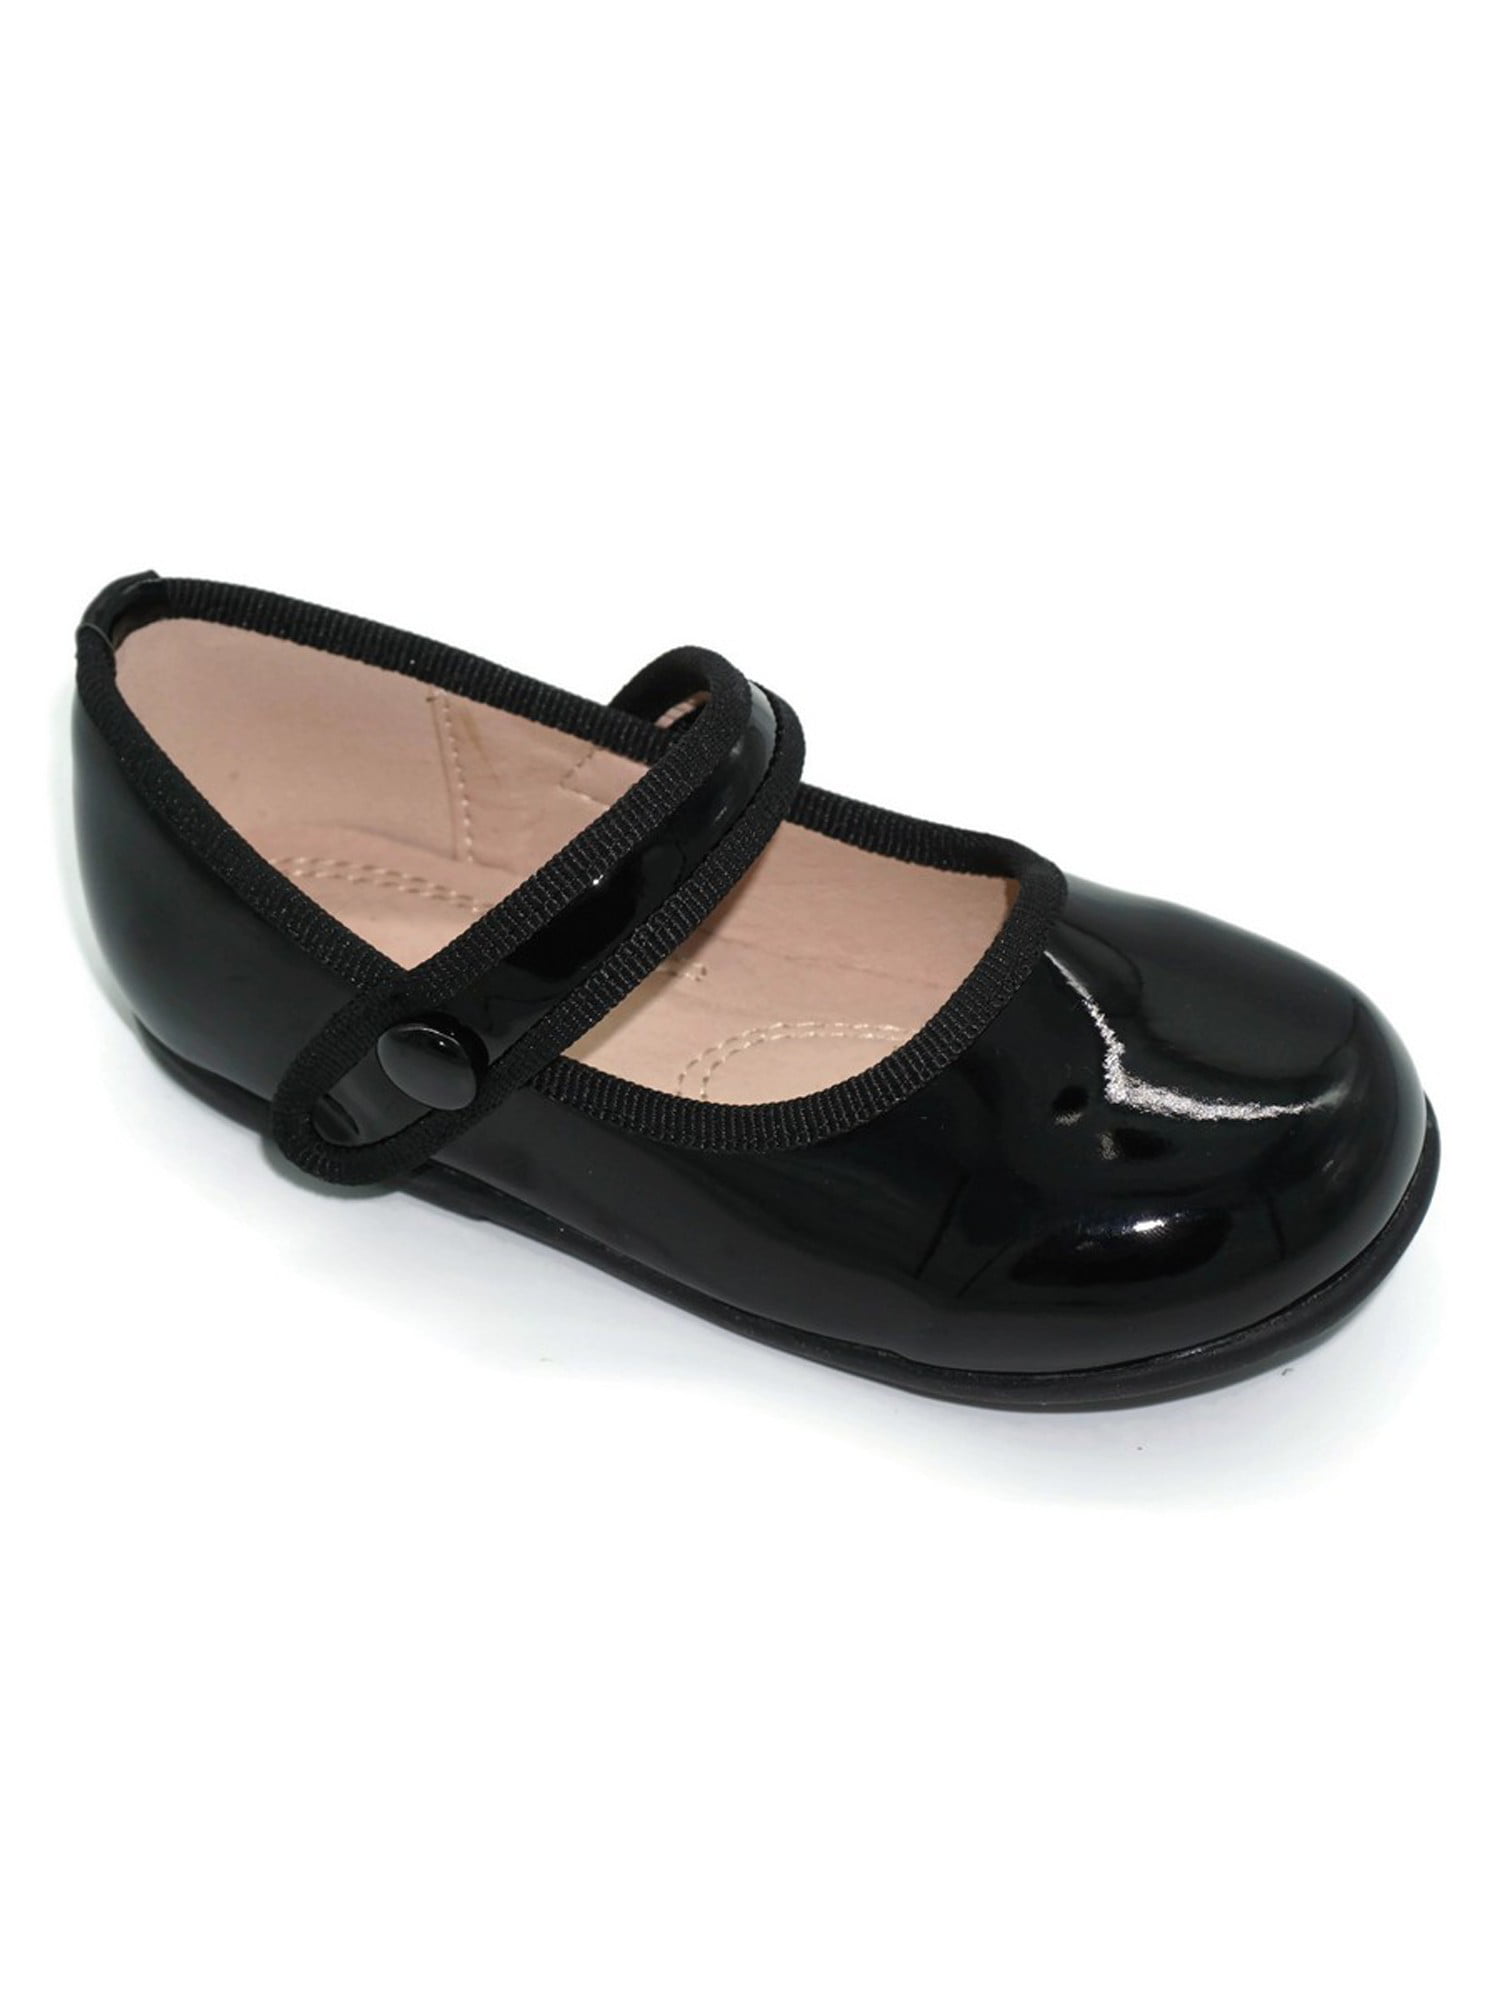 Shoes for Girls Toddler Pipiolo Mary Jane Ballerina Flats 